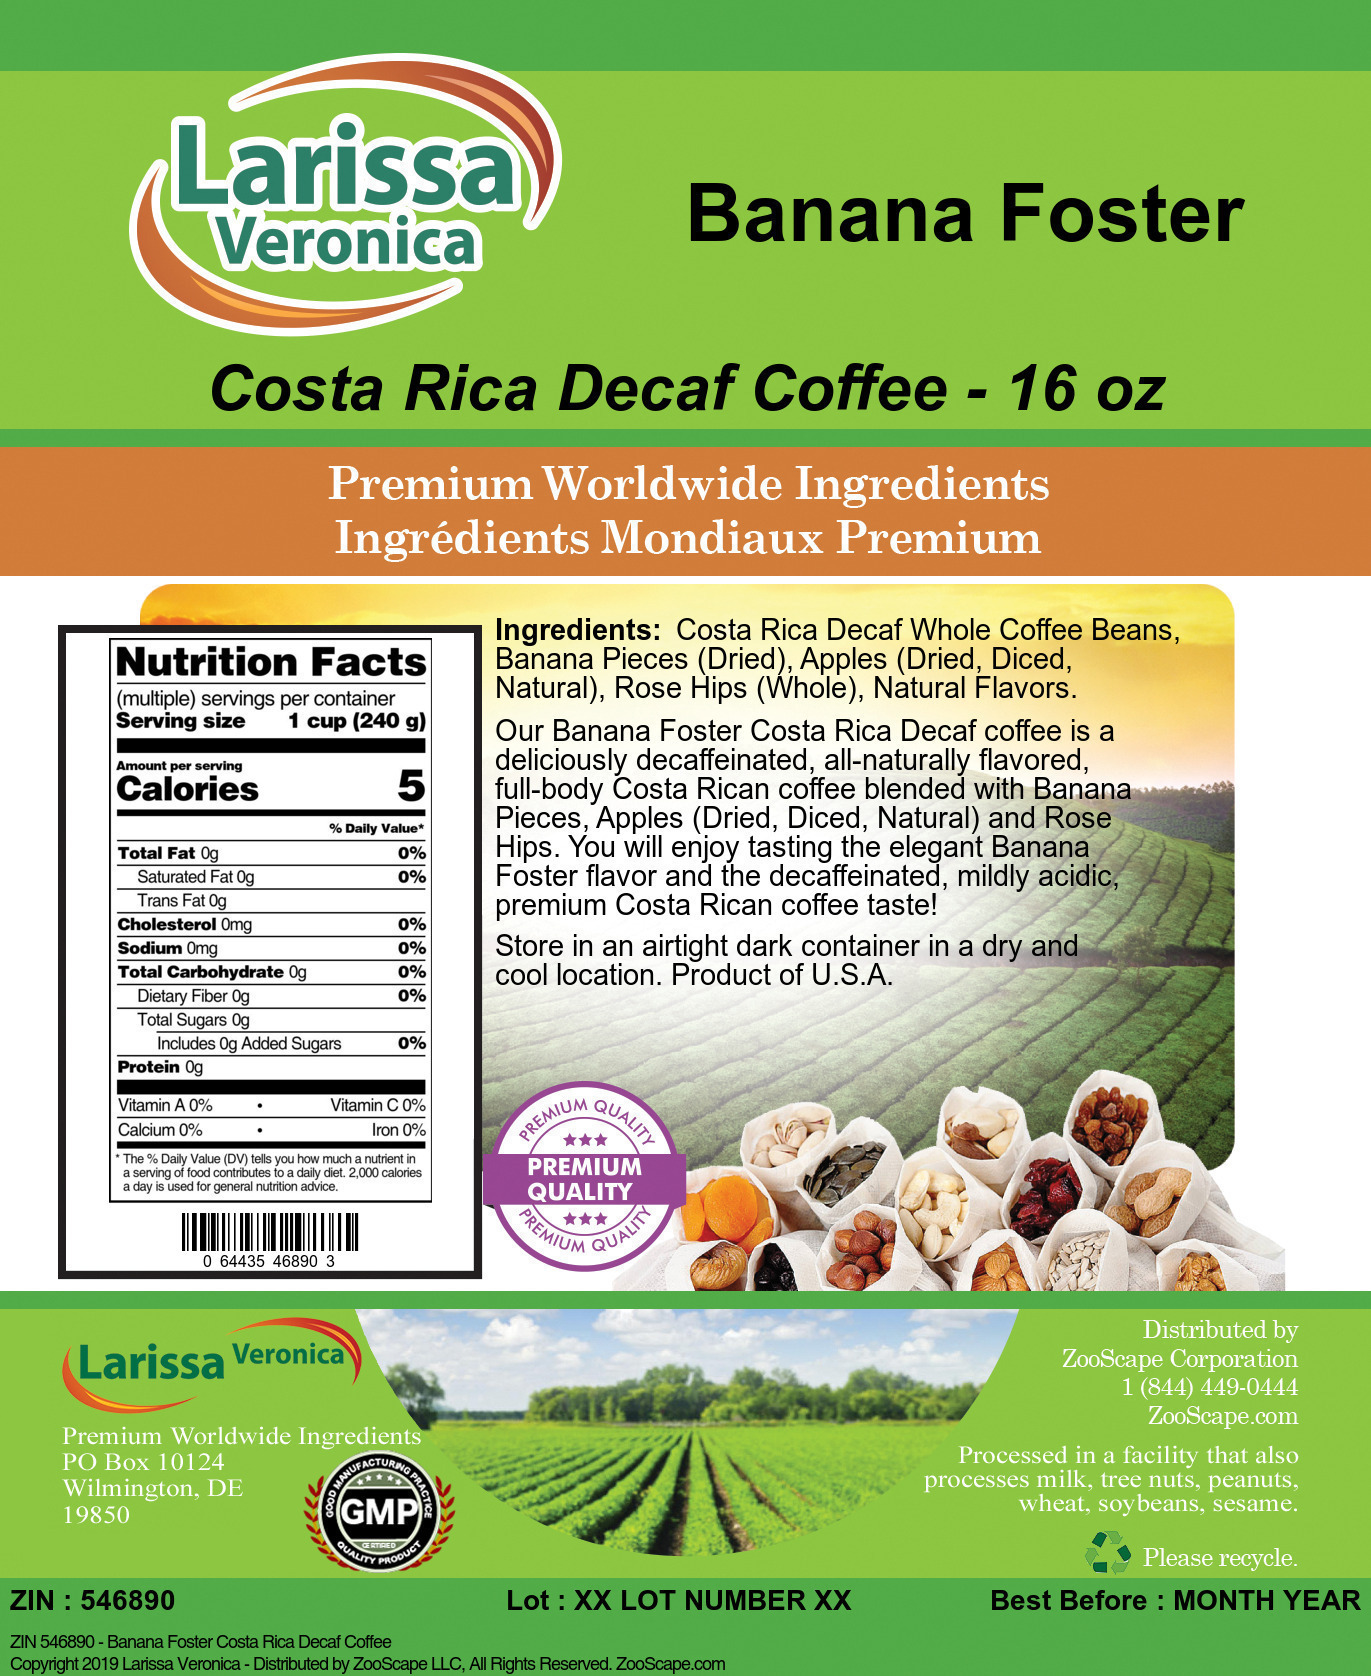 Banana Foster Costa Rica Decaf Coffee - Label